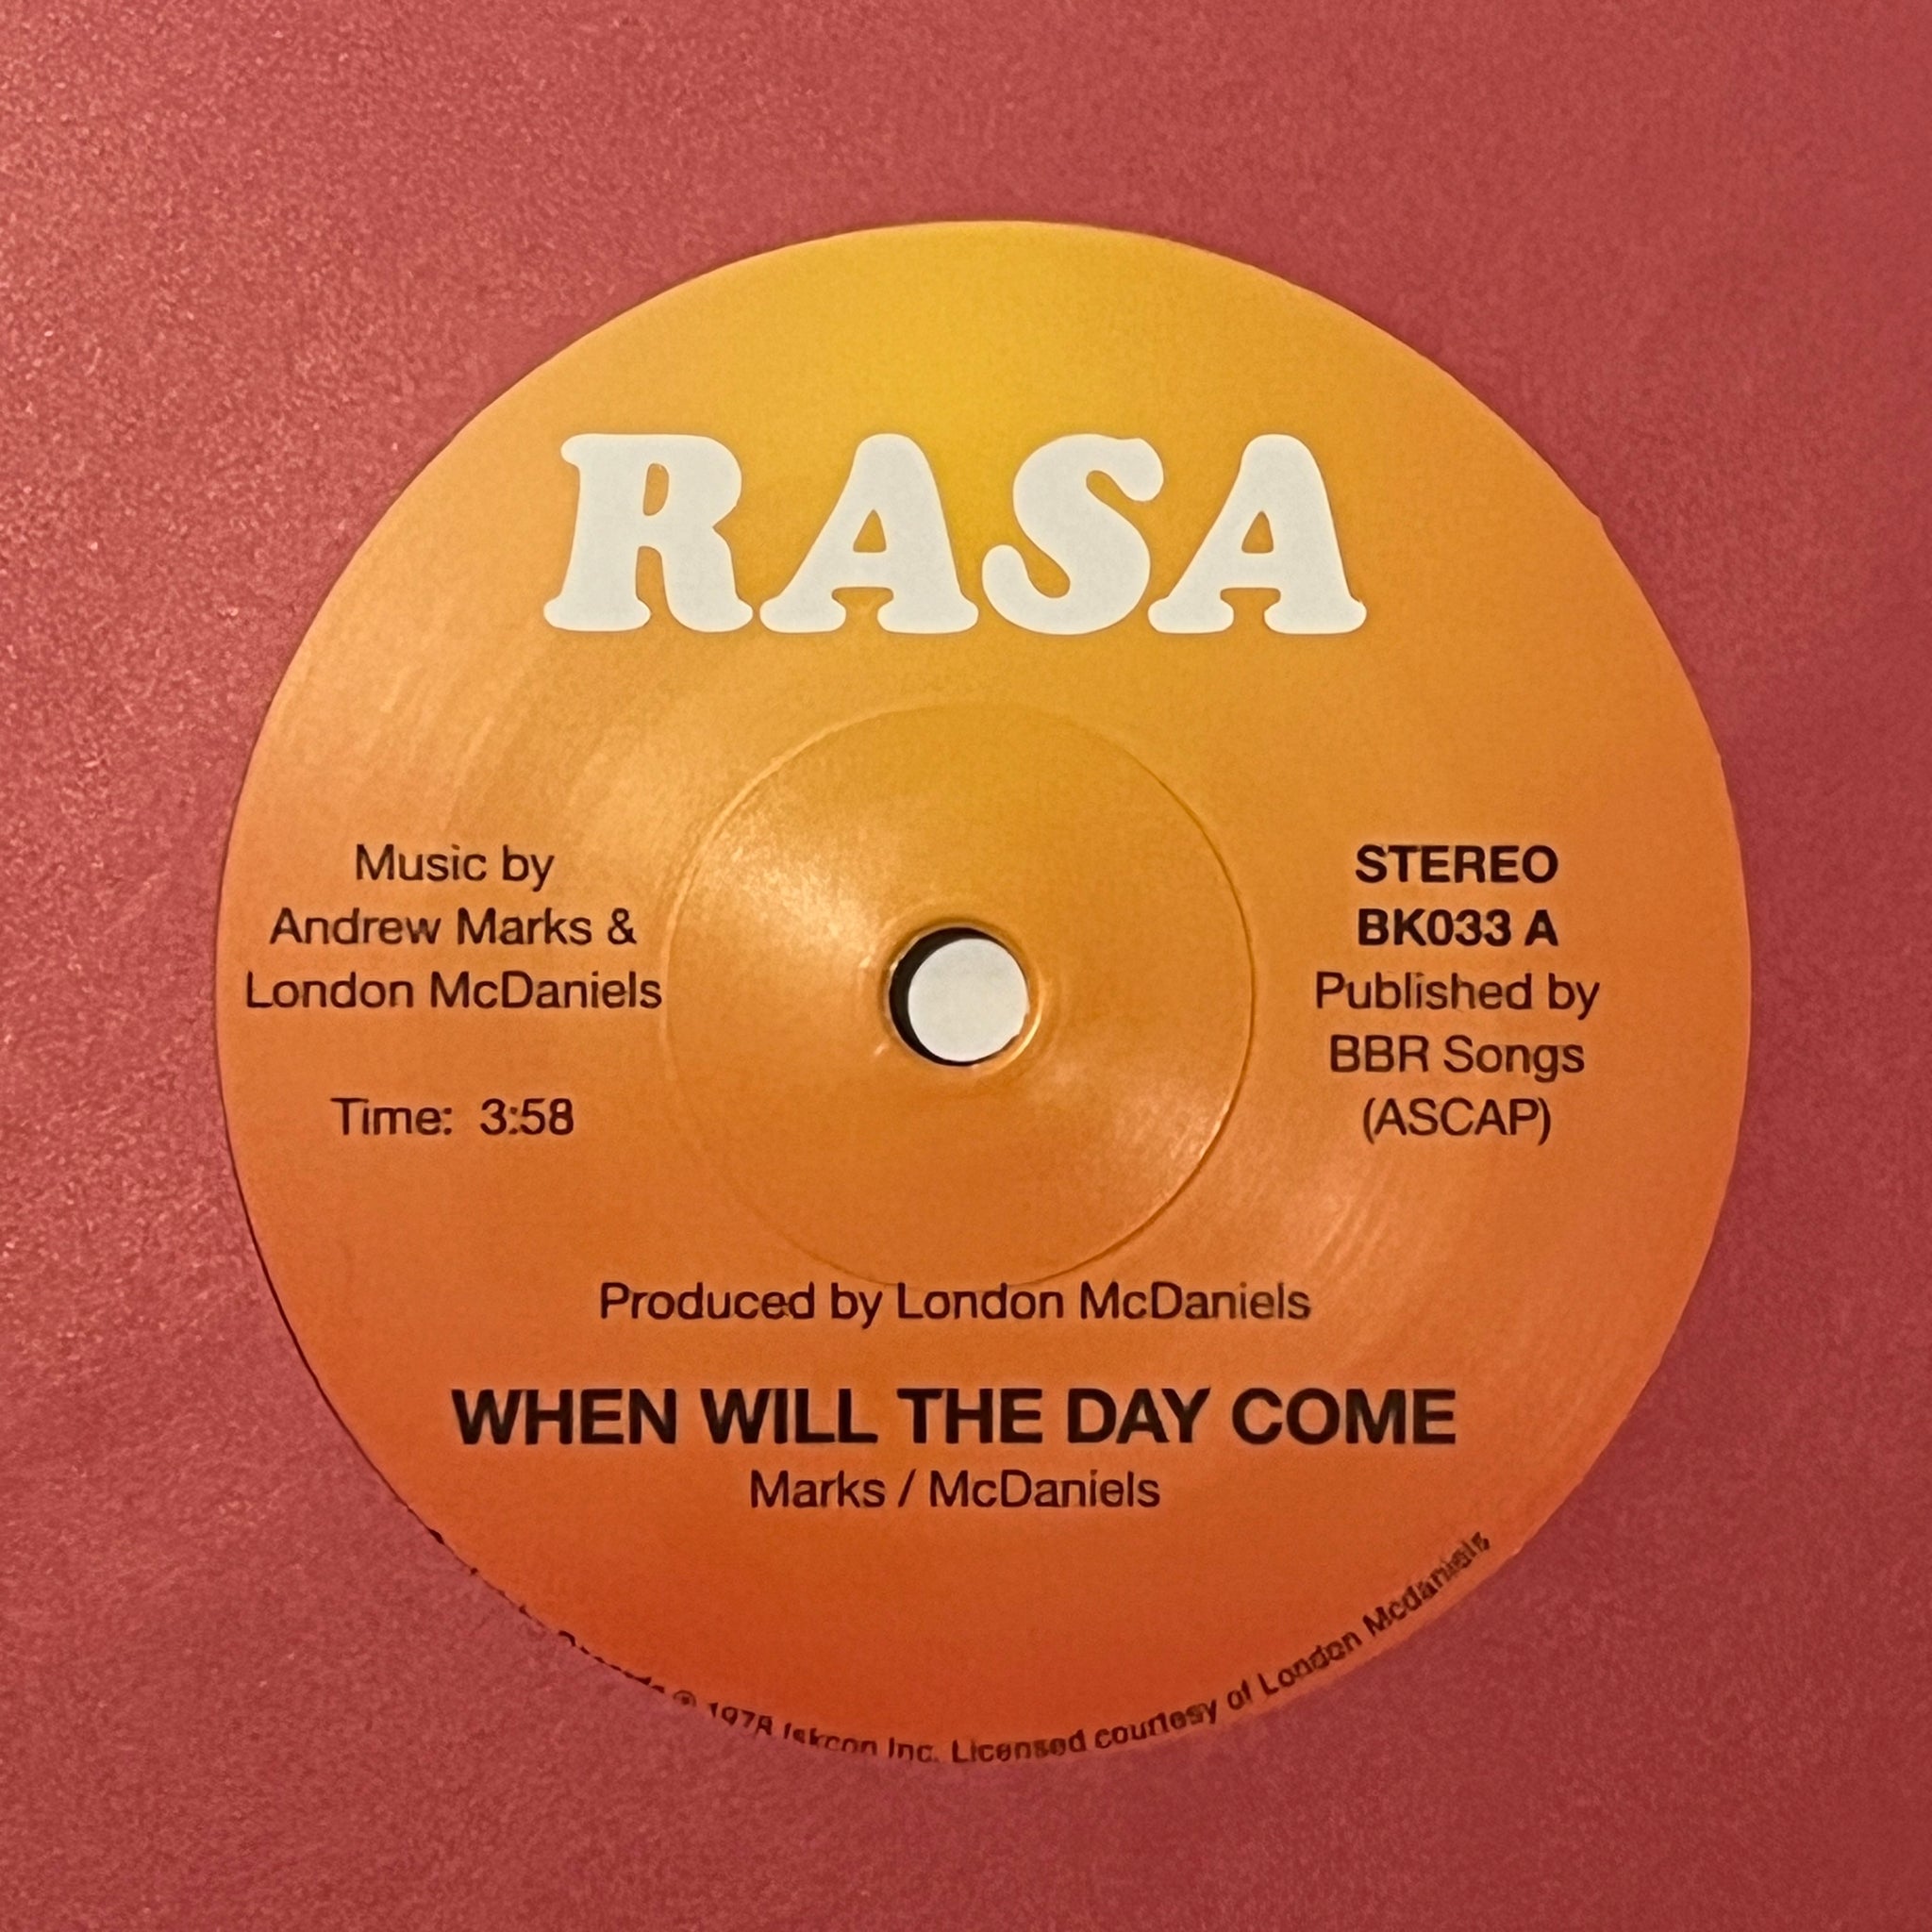 Rasa -  Questions In My Mind / When Will The Day Come (7")